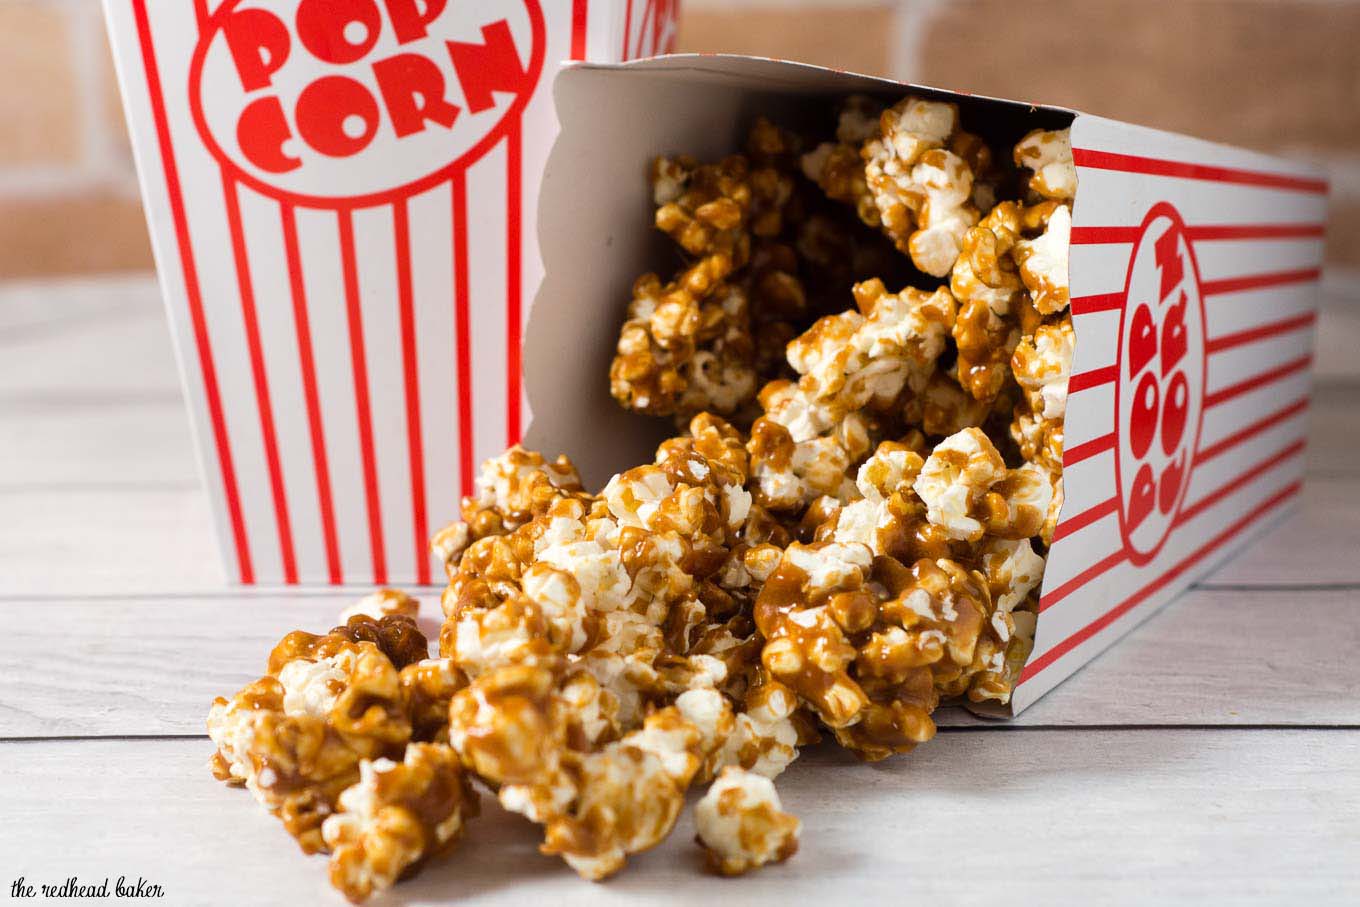 It's so easy to make your own buttery sweet caramel corn at home! This oldie-but-goodie snack will be a hit at any party.